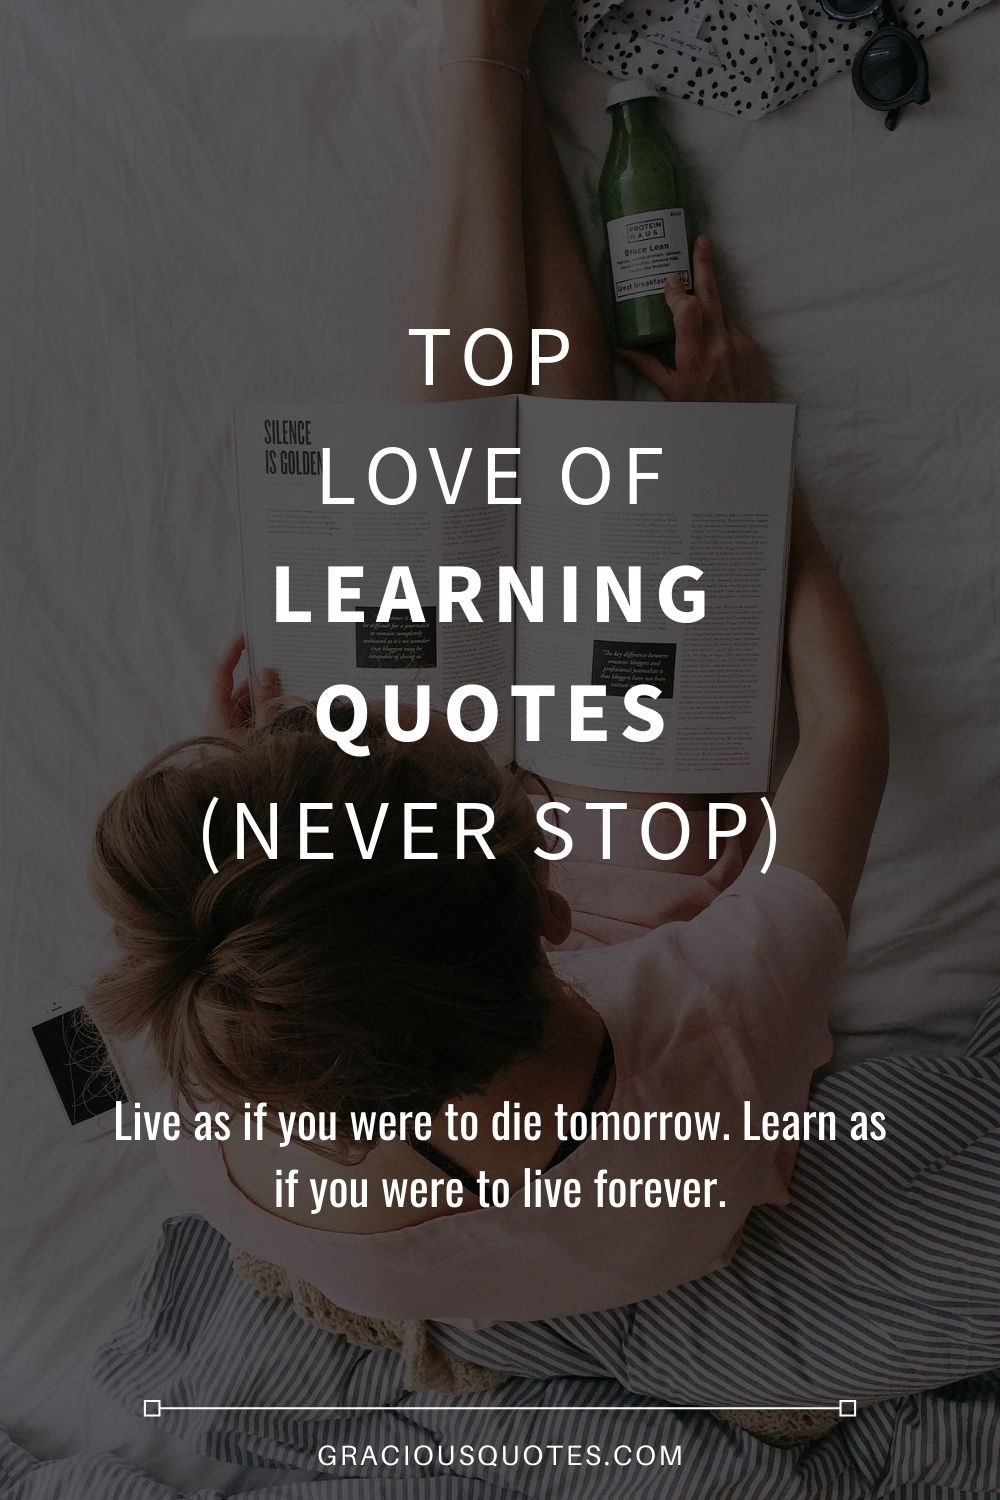 Top Love of Learning Quotes (NEVER STOP) - Gracious Quotes